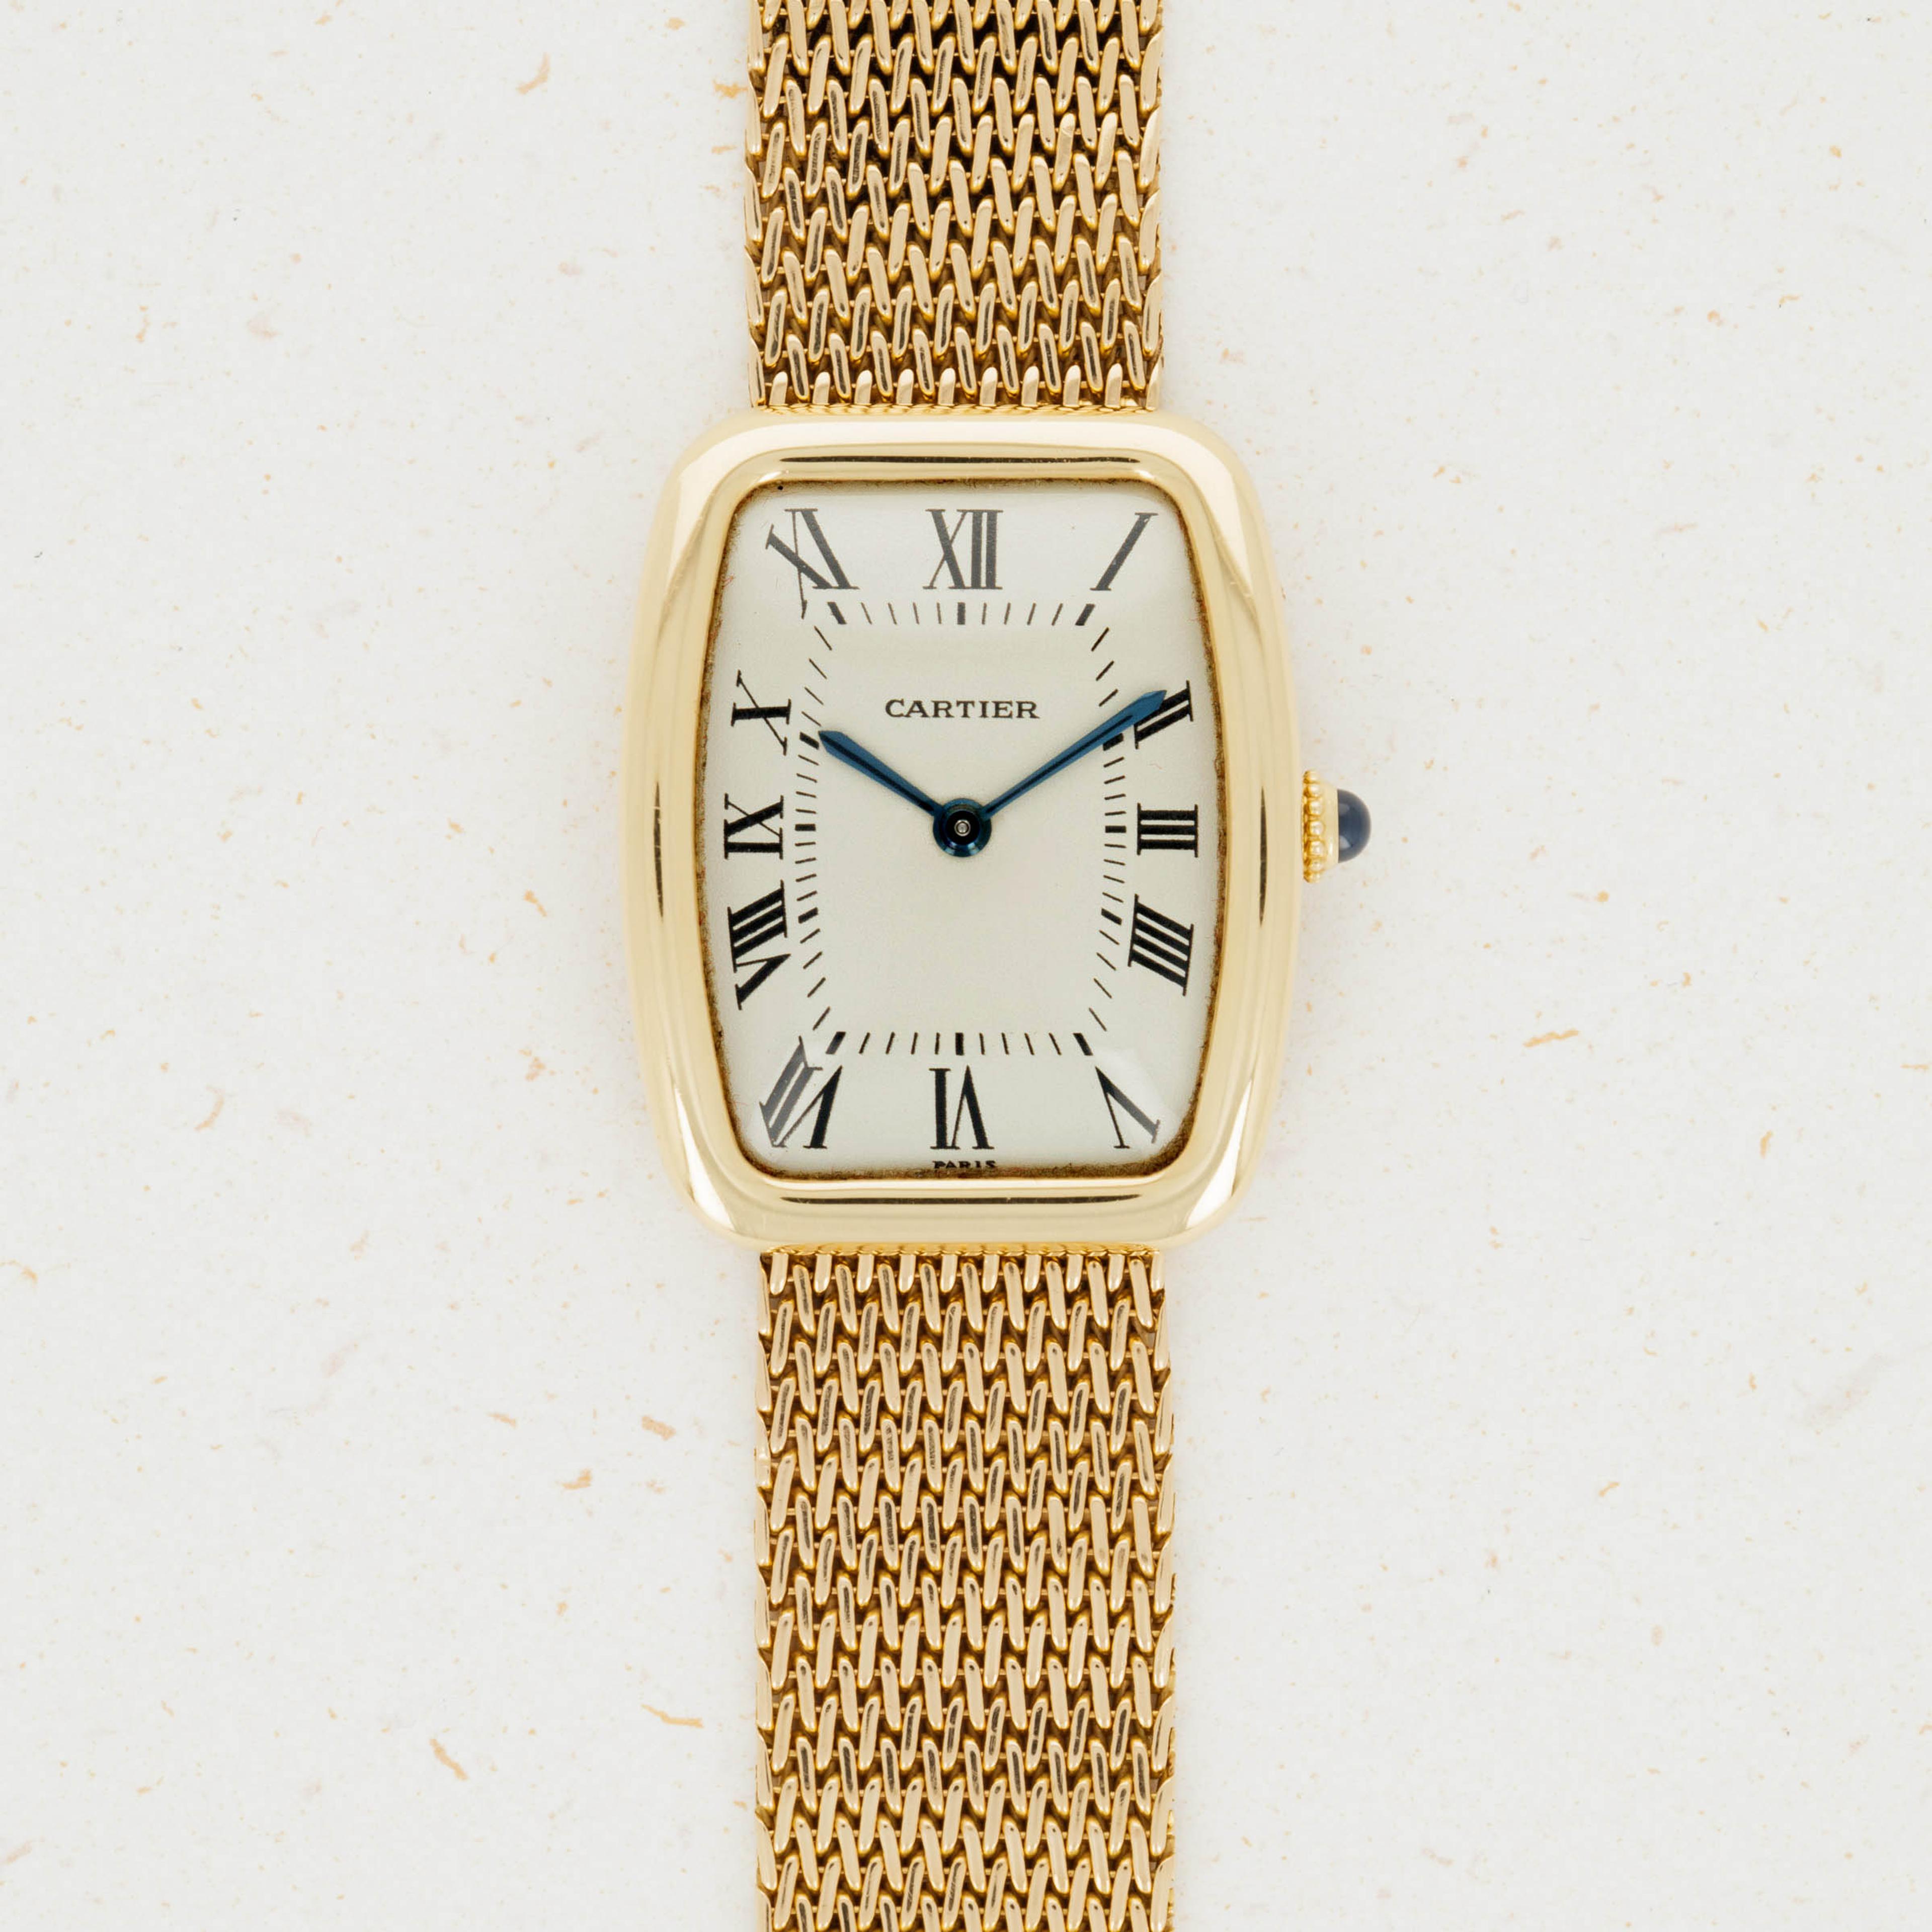 1968 1960's Cartier Tank Louis Watch For Sale - Unisex Vintage Time only